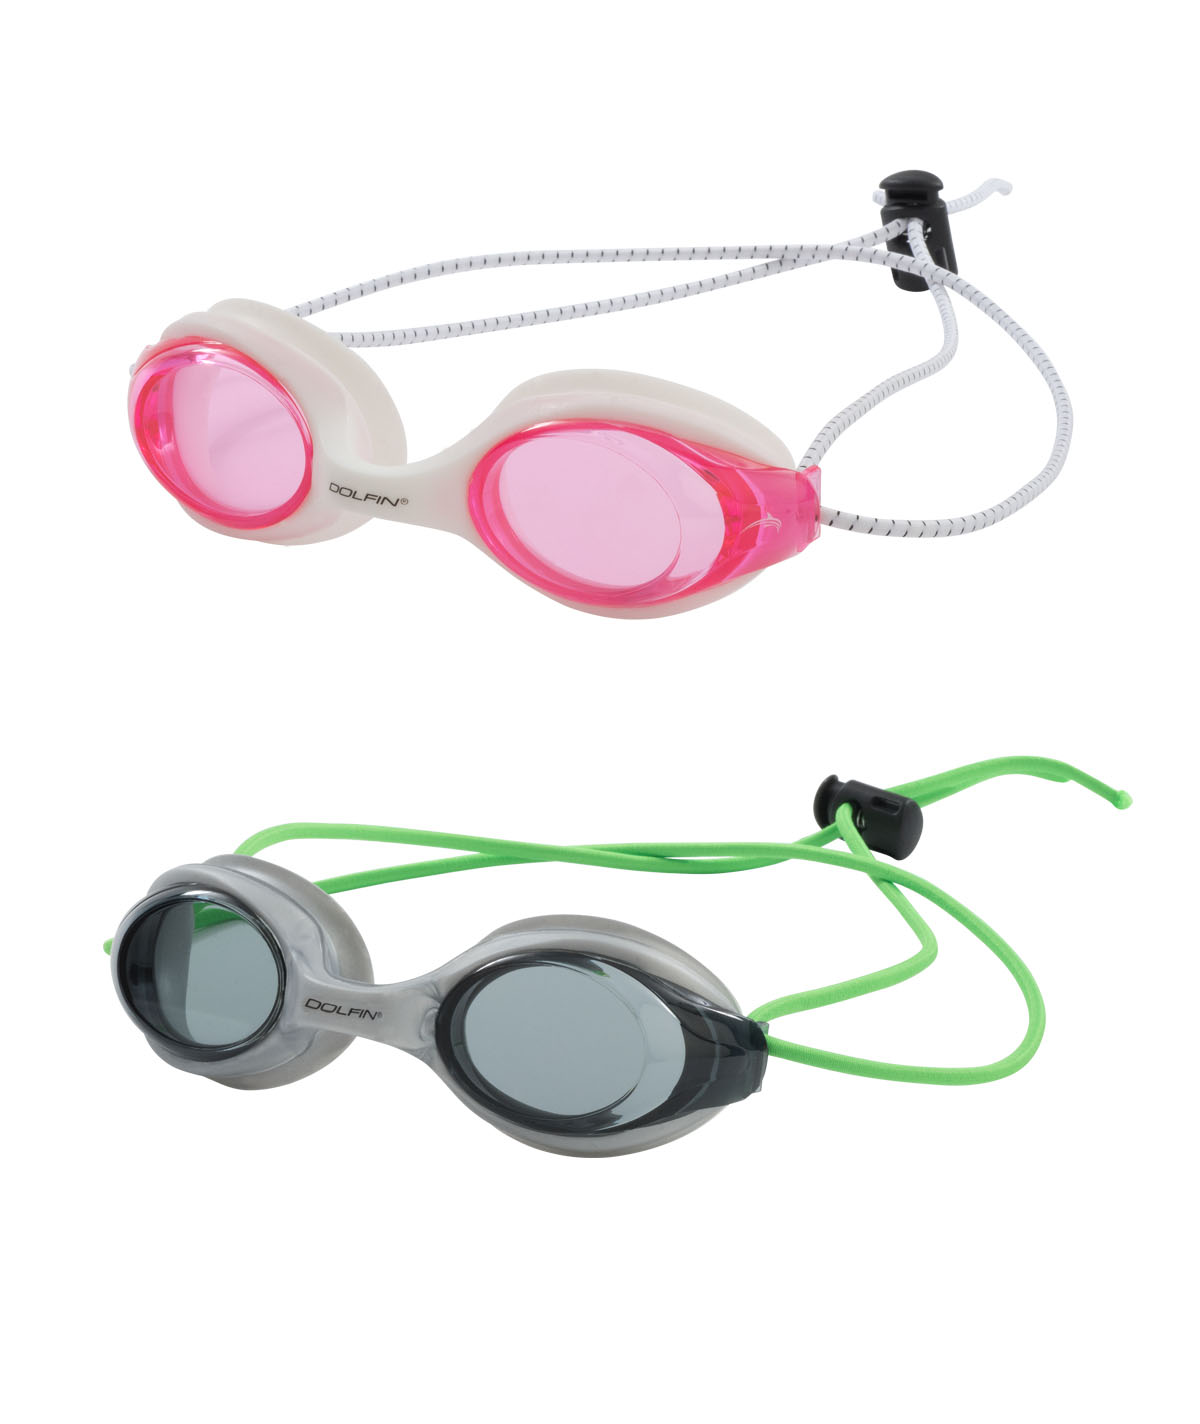 Bungee Racer Goggle Two Pack Swim Accessory